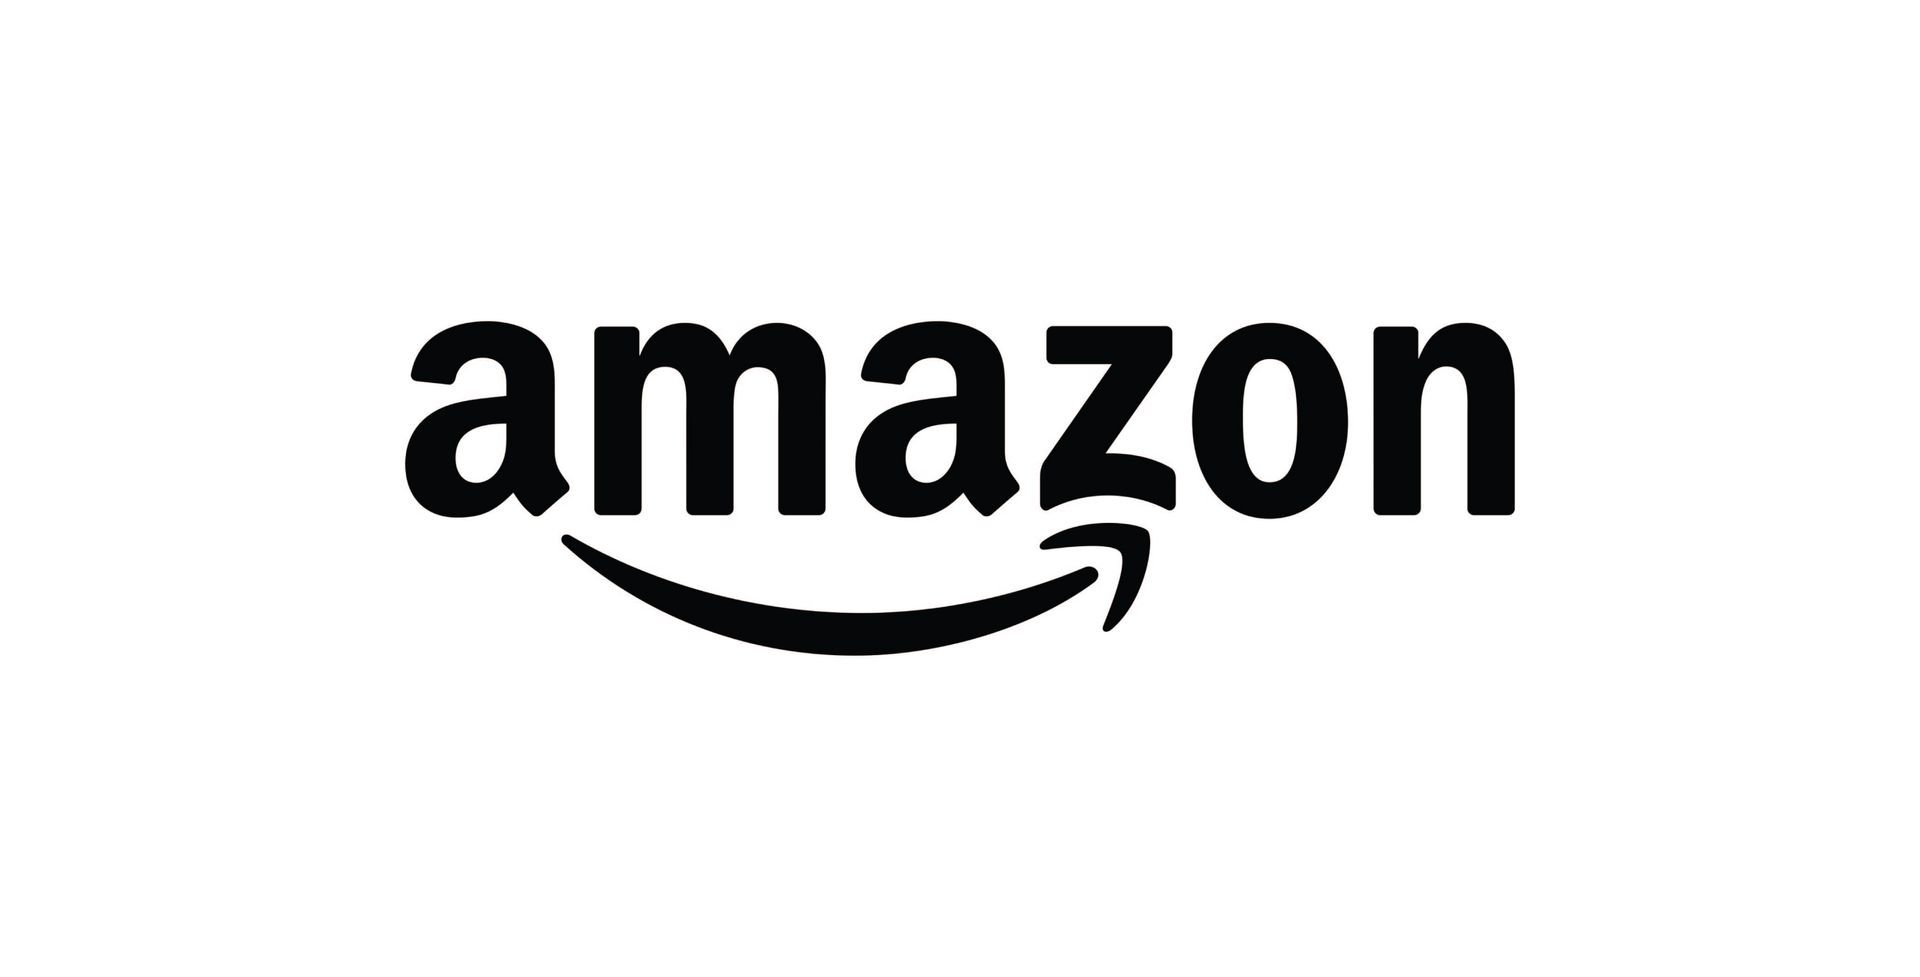 The amazon logo is black and white and has a smile on it.